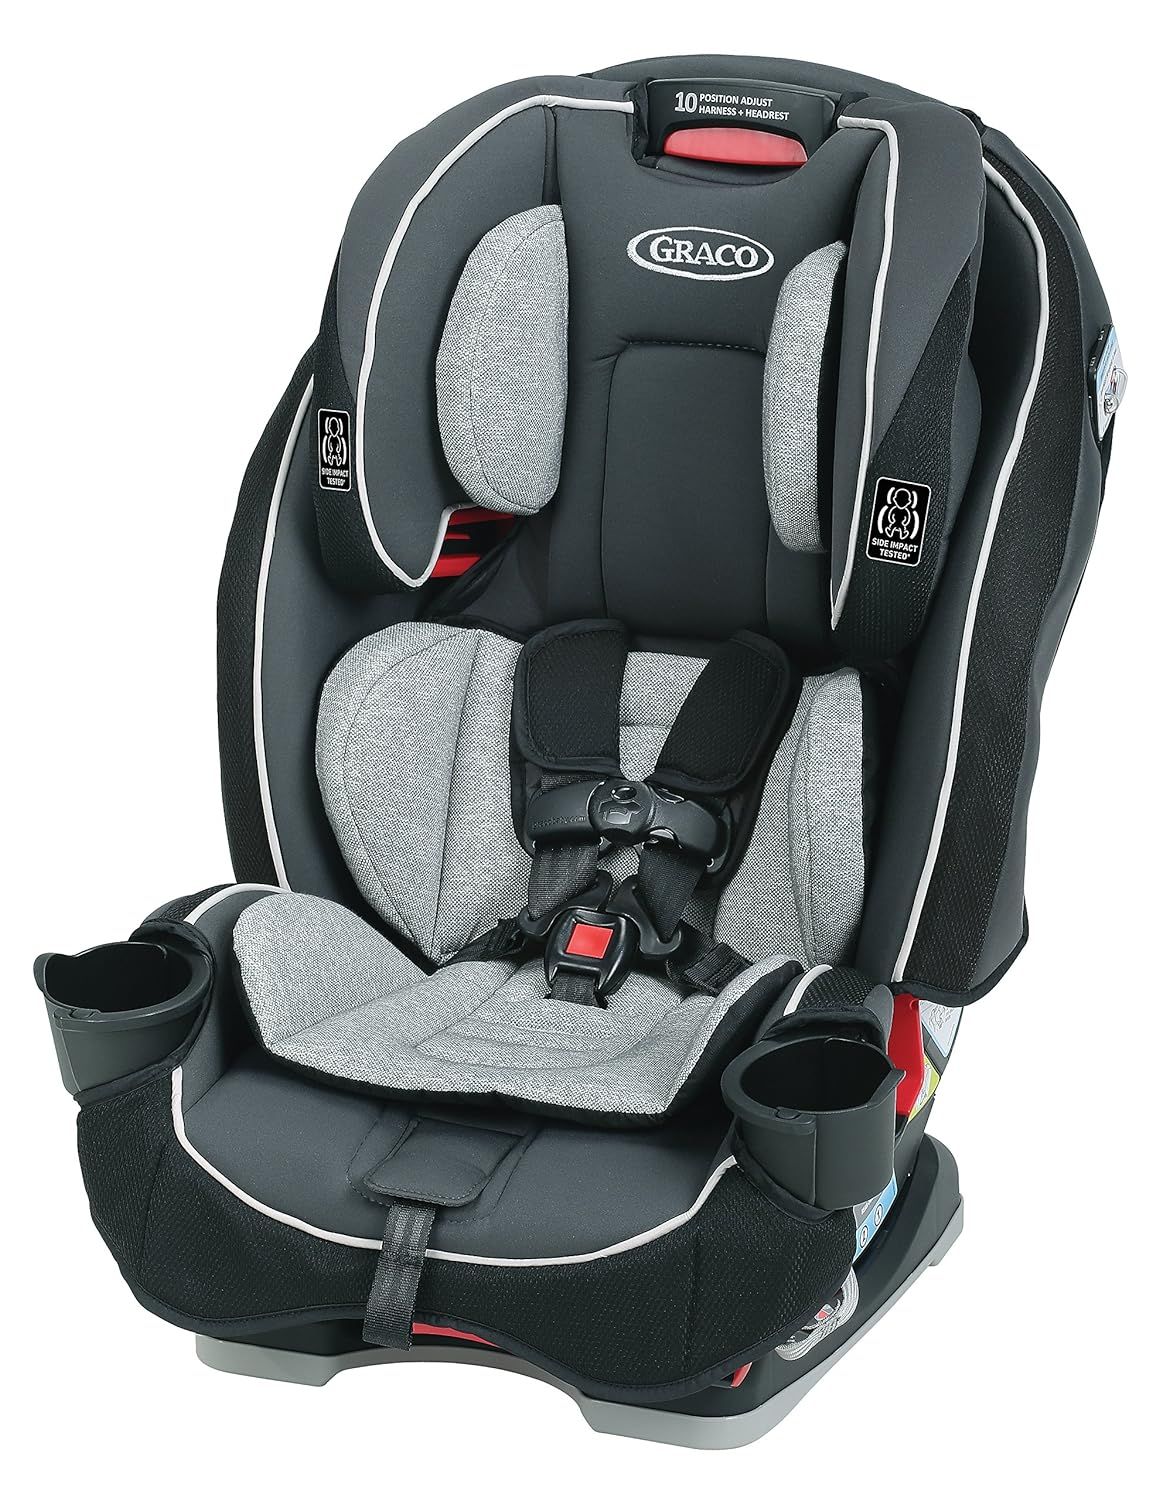 Graco SlimFit 3 in 1 Convertible Car Seat | Infant to Toddler Car Seat, Saves Space in your Back ... | Amazon (US)